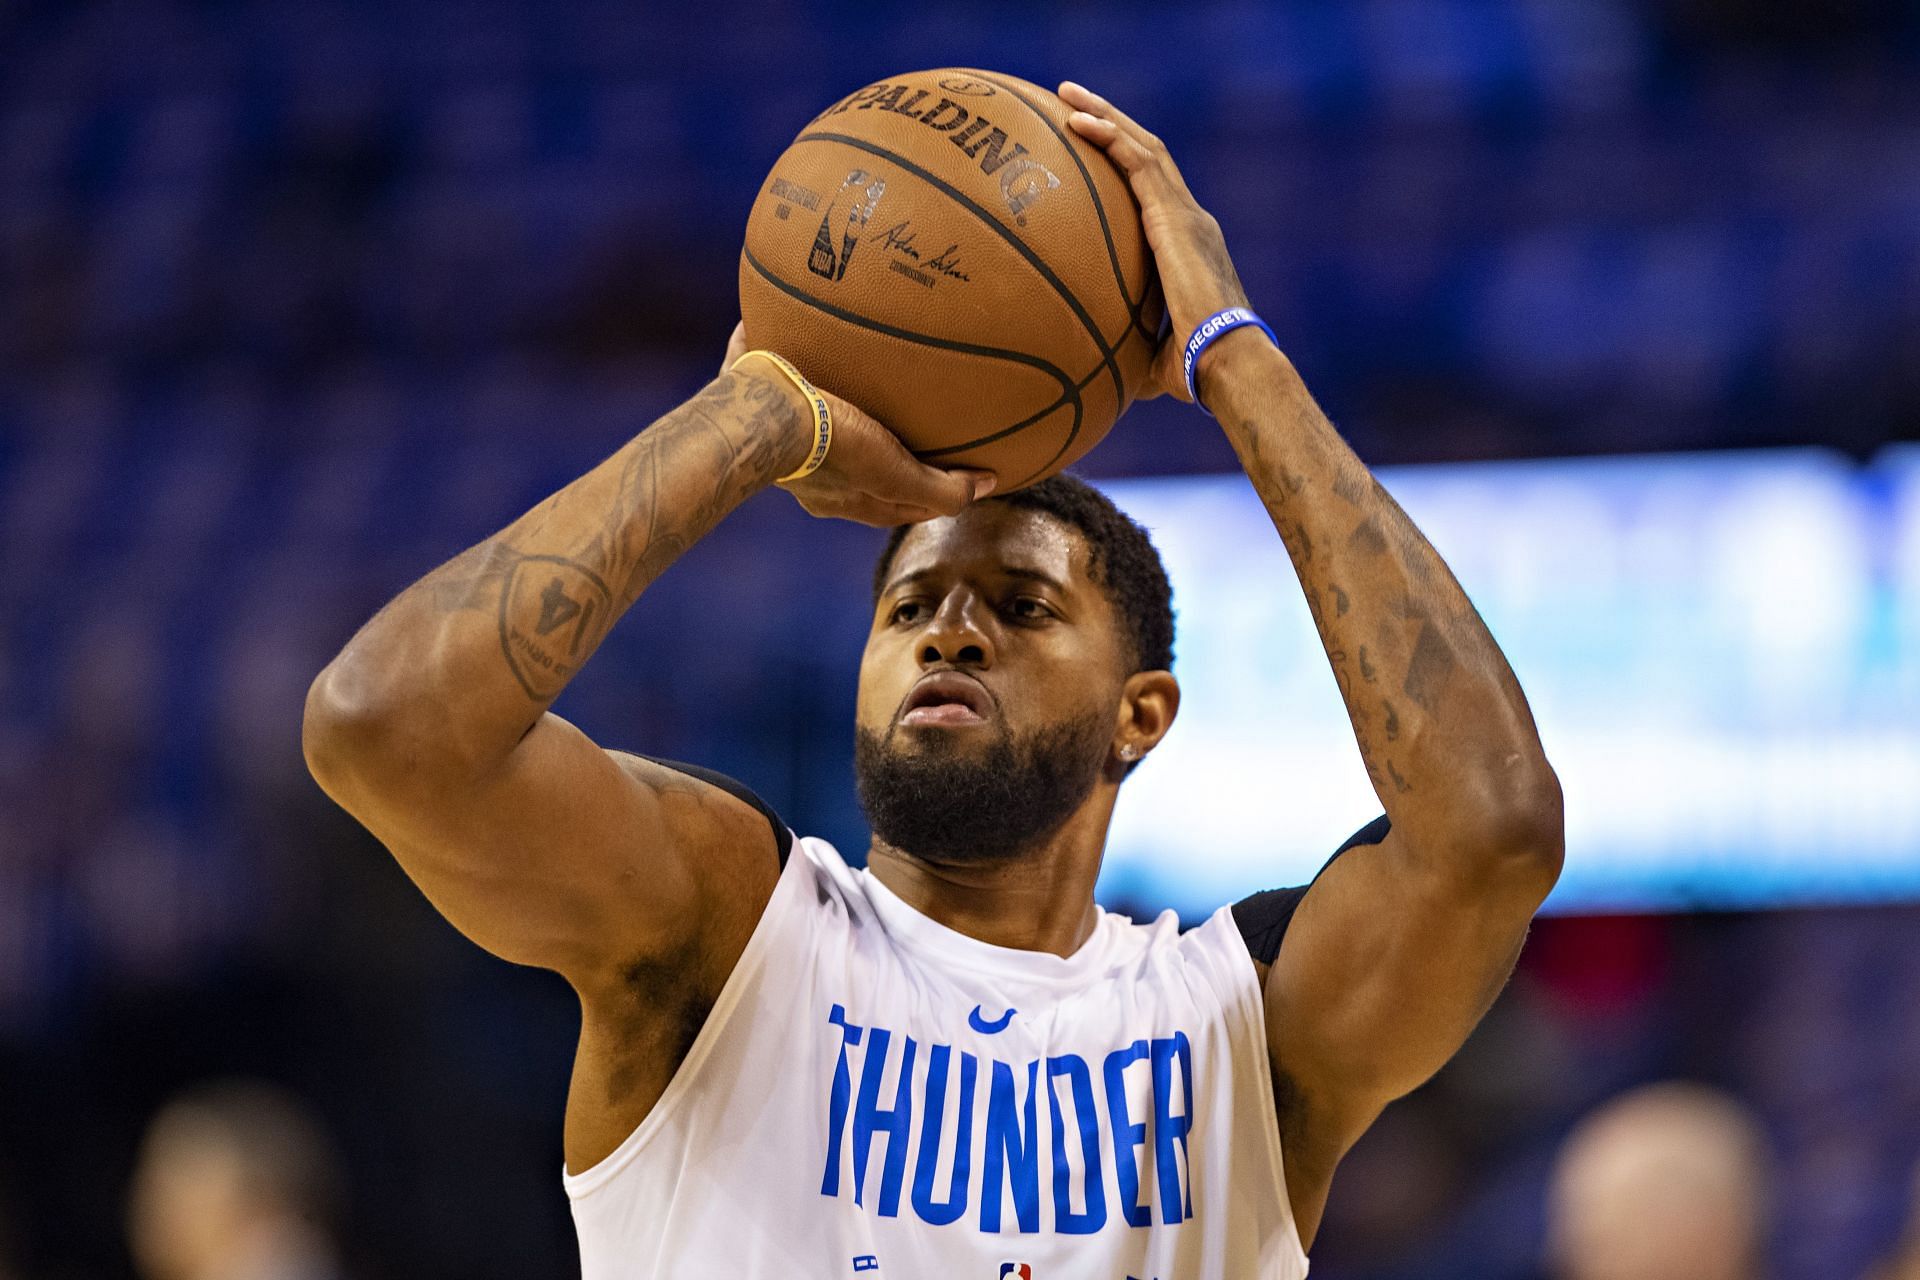 Paul George #13 of the Oklahoma City Thunder warms up before a game against the Portland Trail Blazers during Round One Game Three of the 2019 NBA Playoffs on April 21, 2019 at Chesapeake Energy Arena in Oklahoma City, Oklahoma.